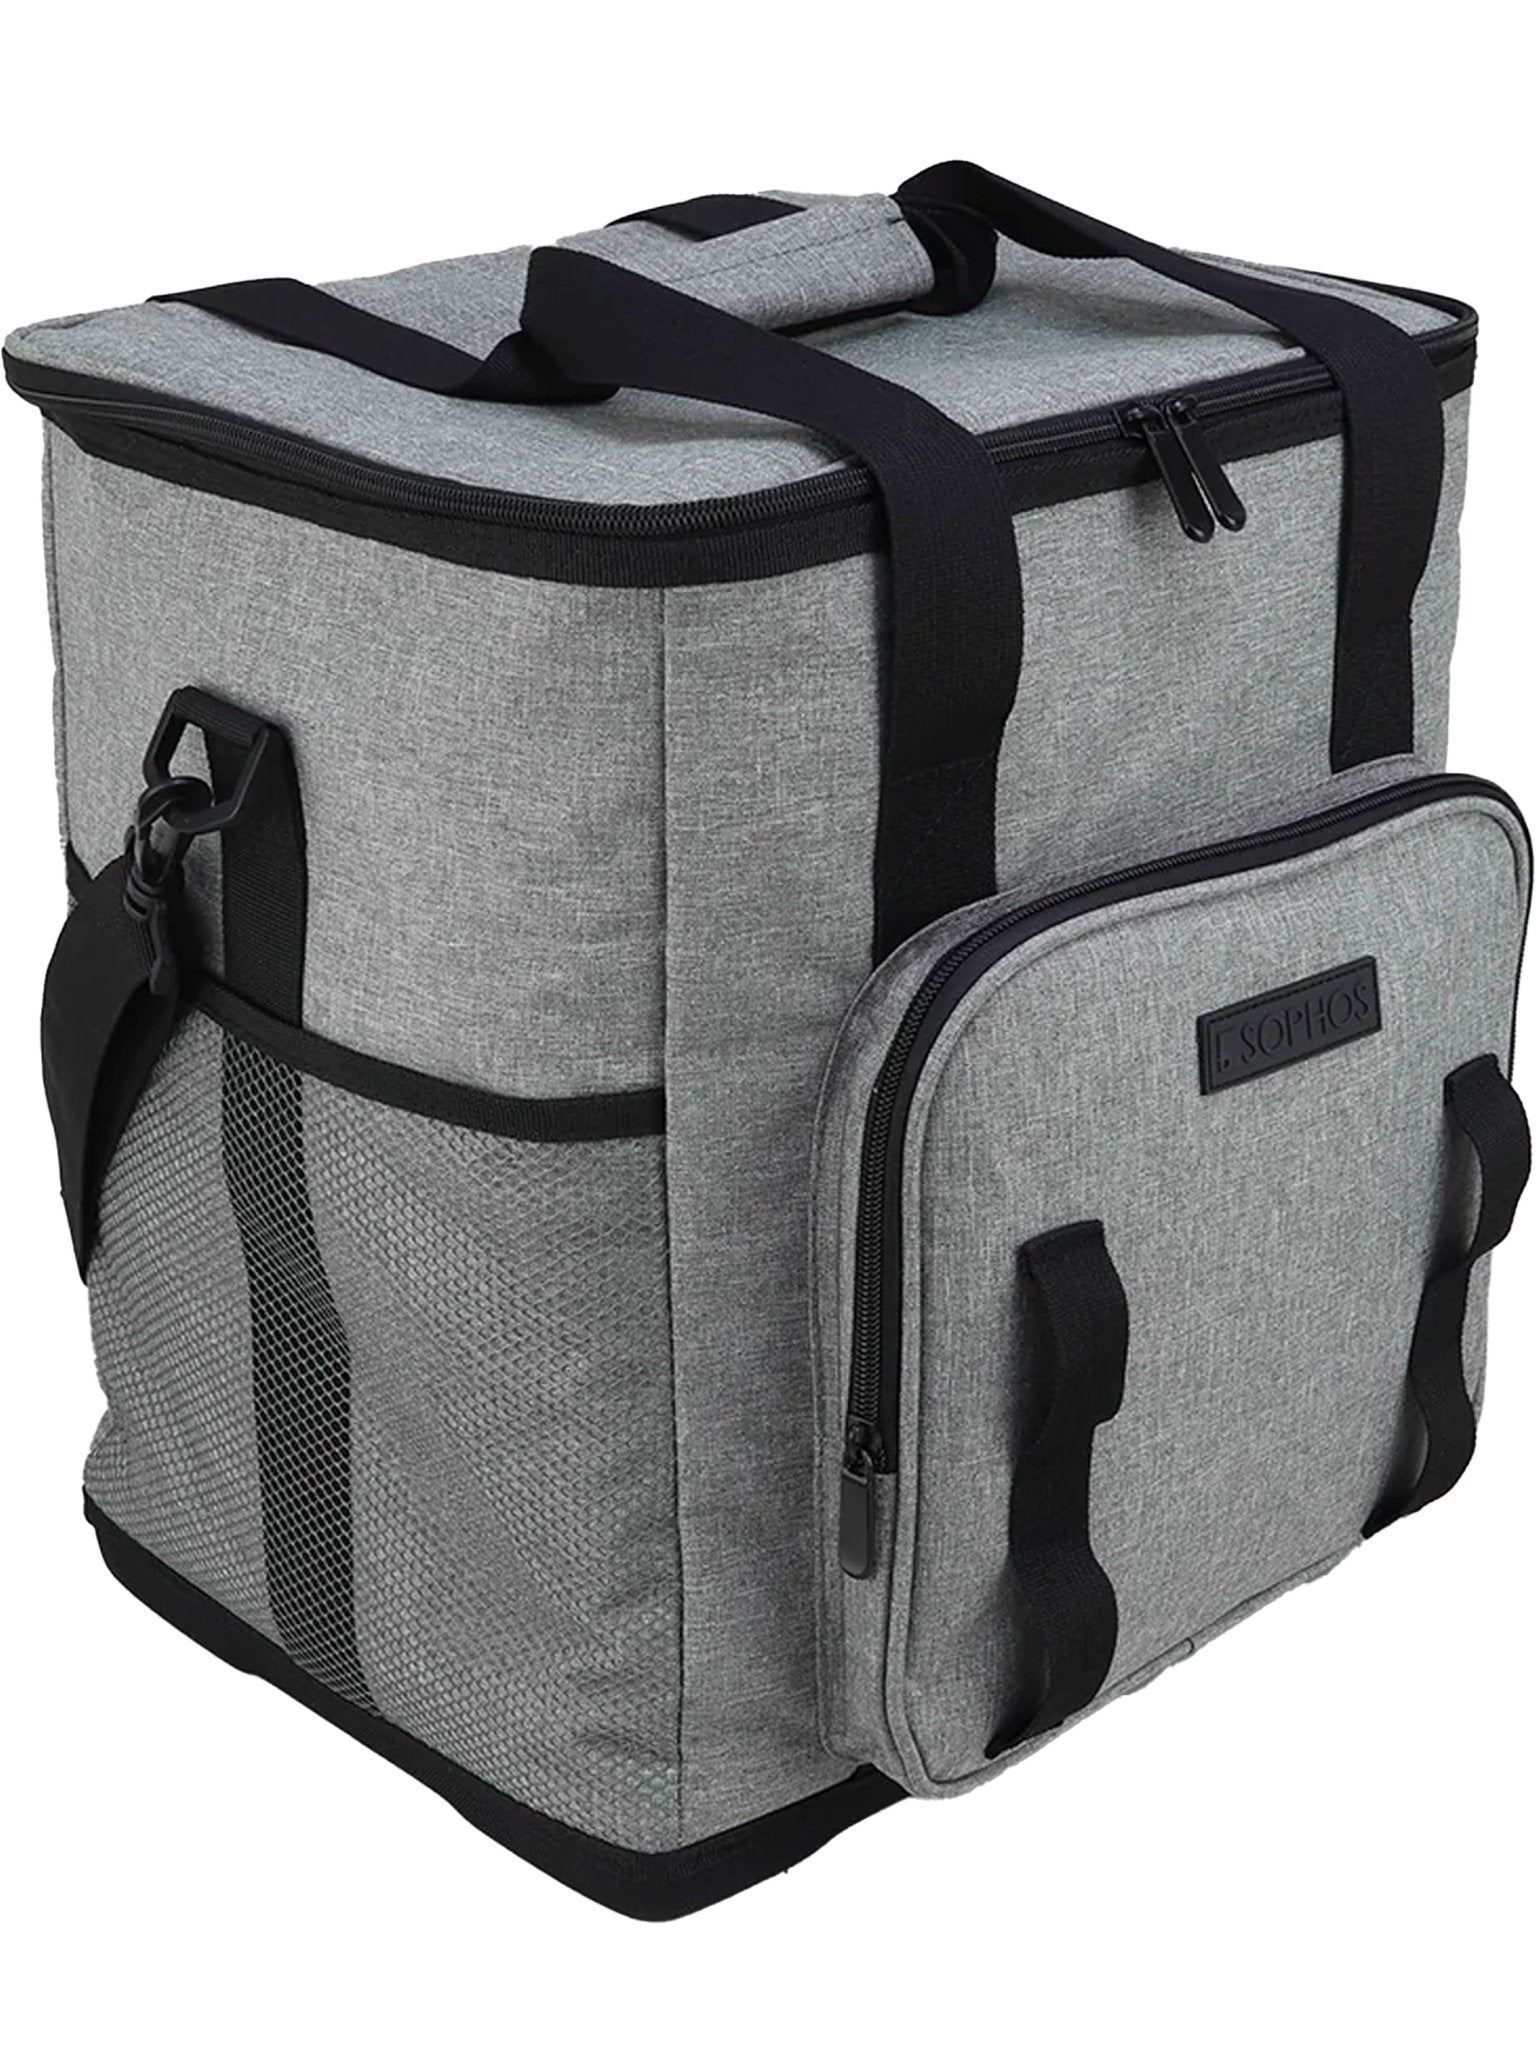 4elementsclothingSophosSophos - Premium Cool bag / picnic bag with shoulder strap and compartments by SophosLunch Boxes795044